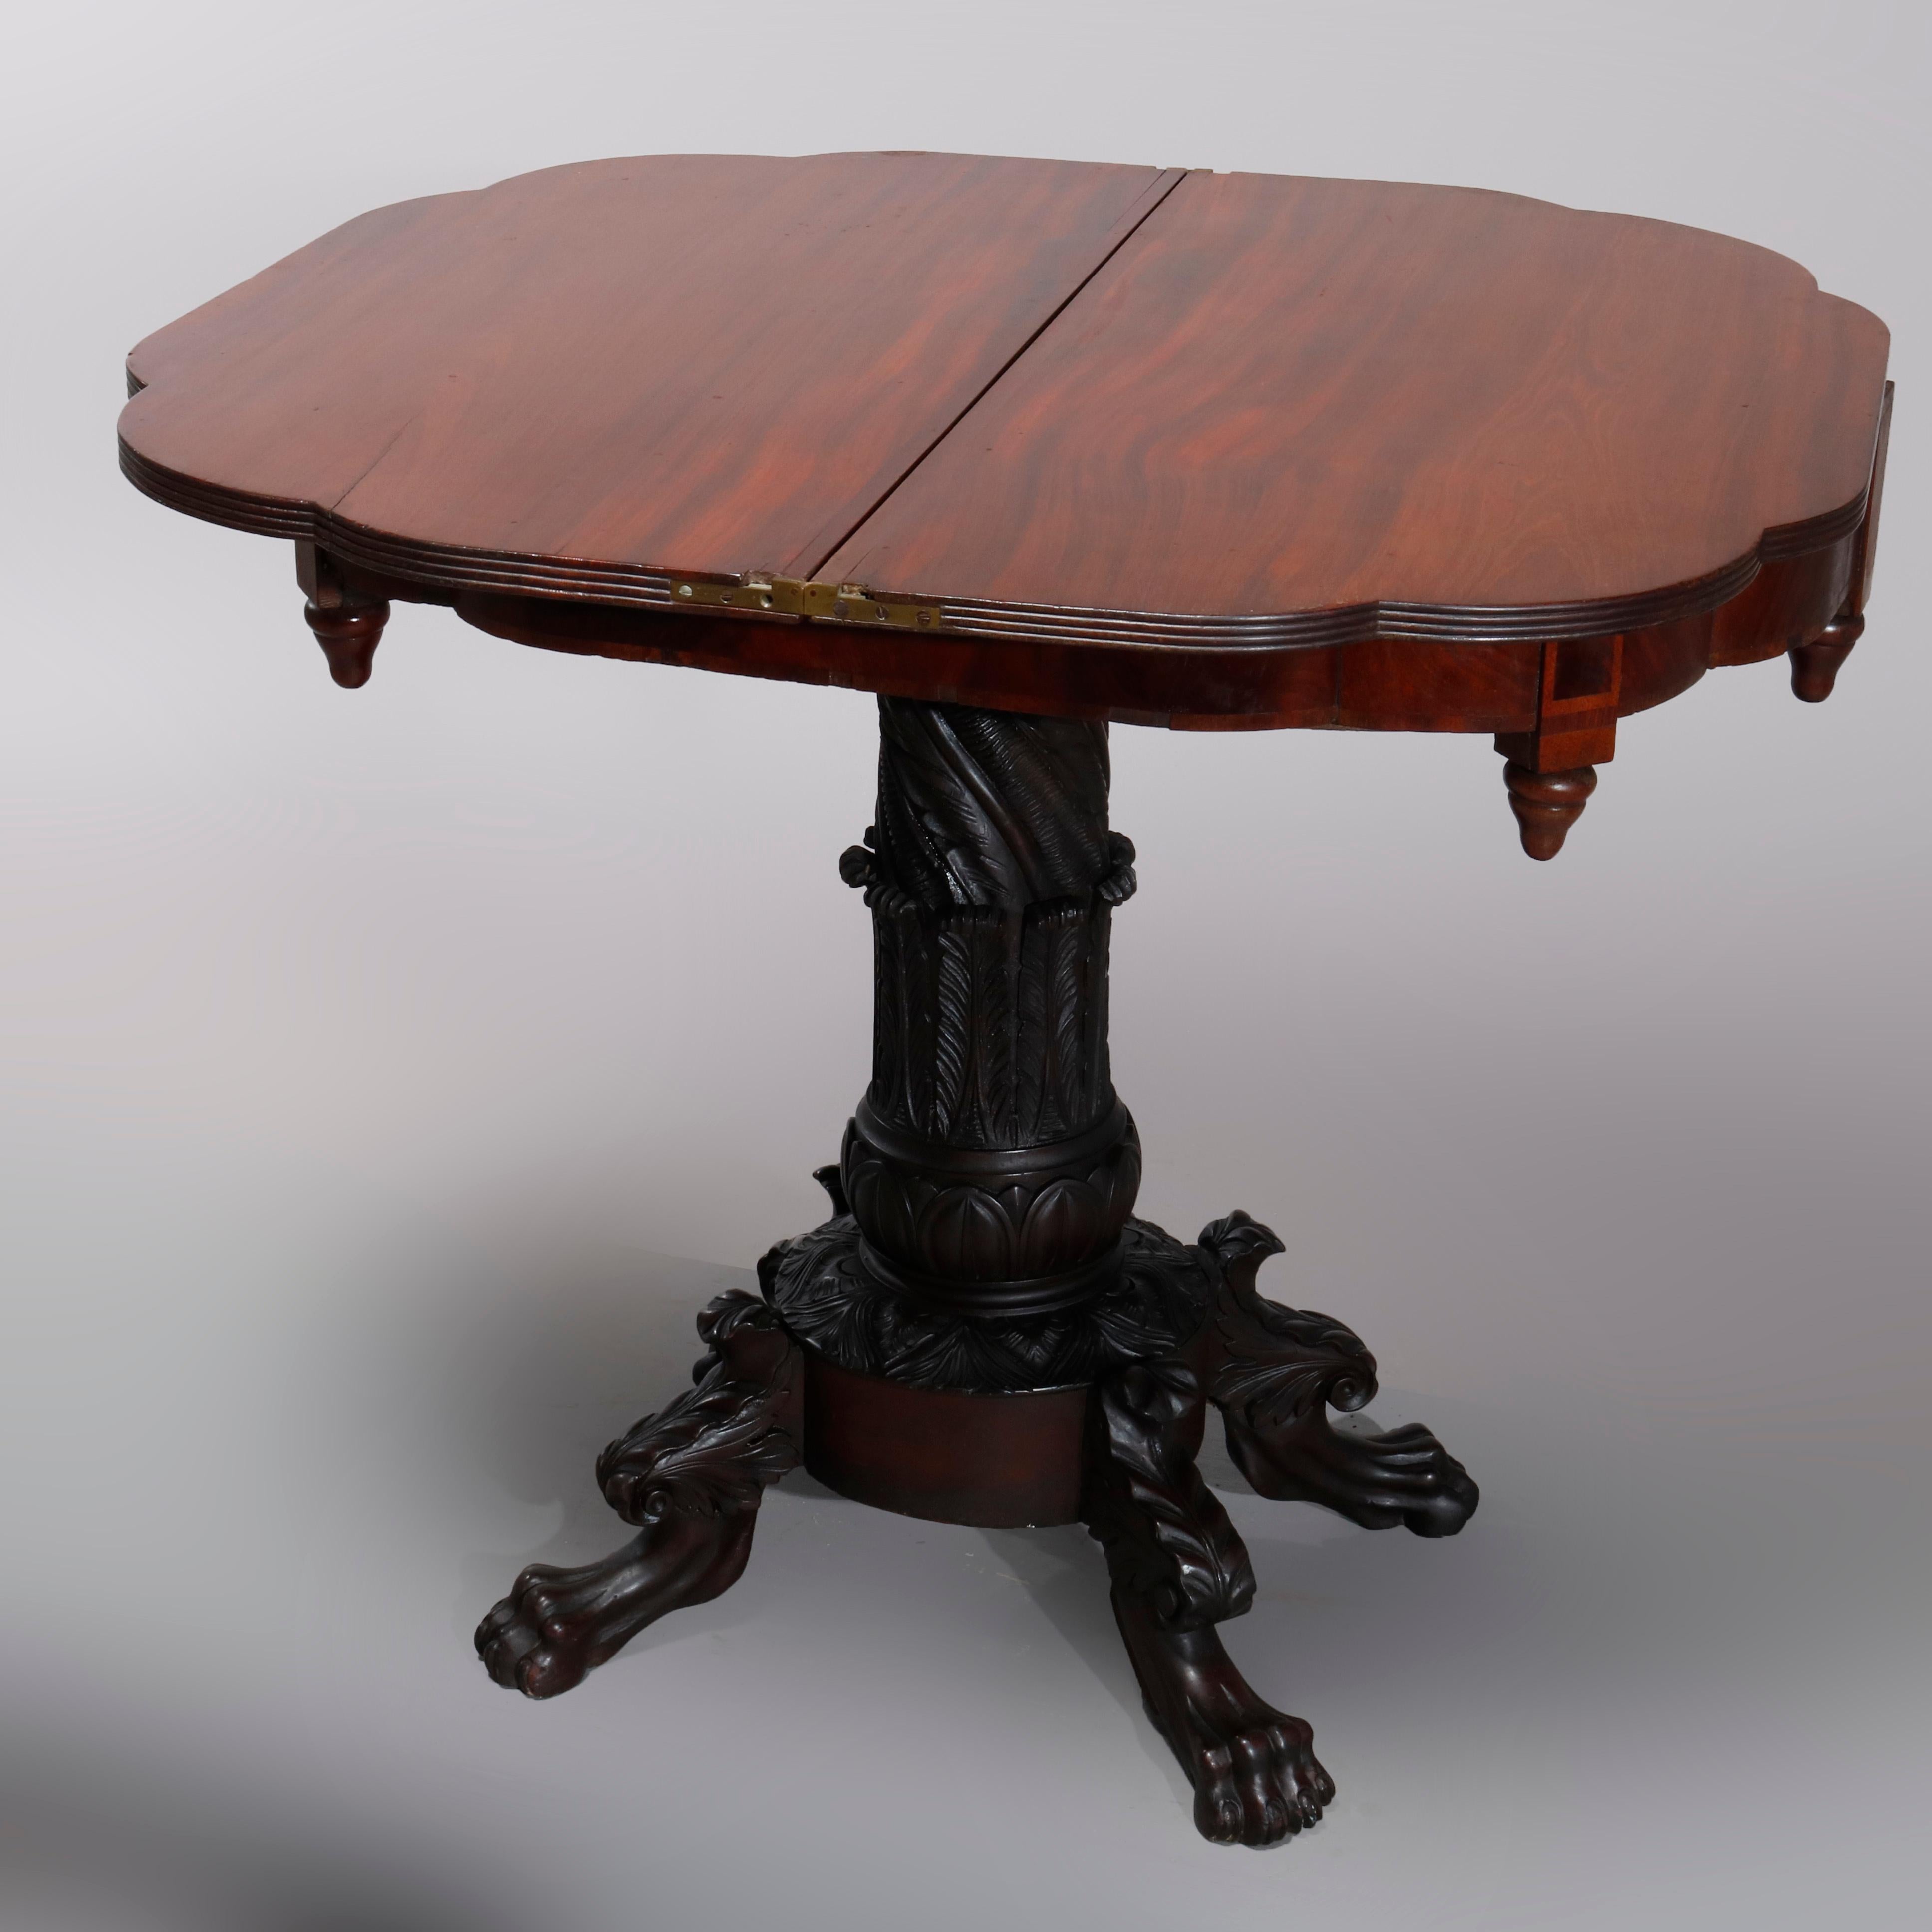 An antique American Empire game table offers flame mahogany construction with shaped demilune top having deep skirt with drop finials and surmounting heavily carved acanthus foliate pedestal base raised on carved legs terminating in paw feet, circa